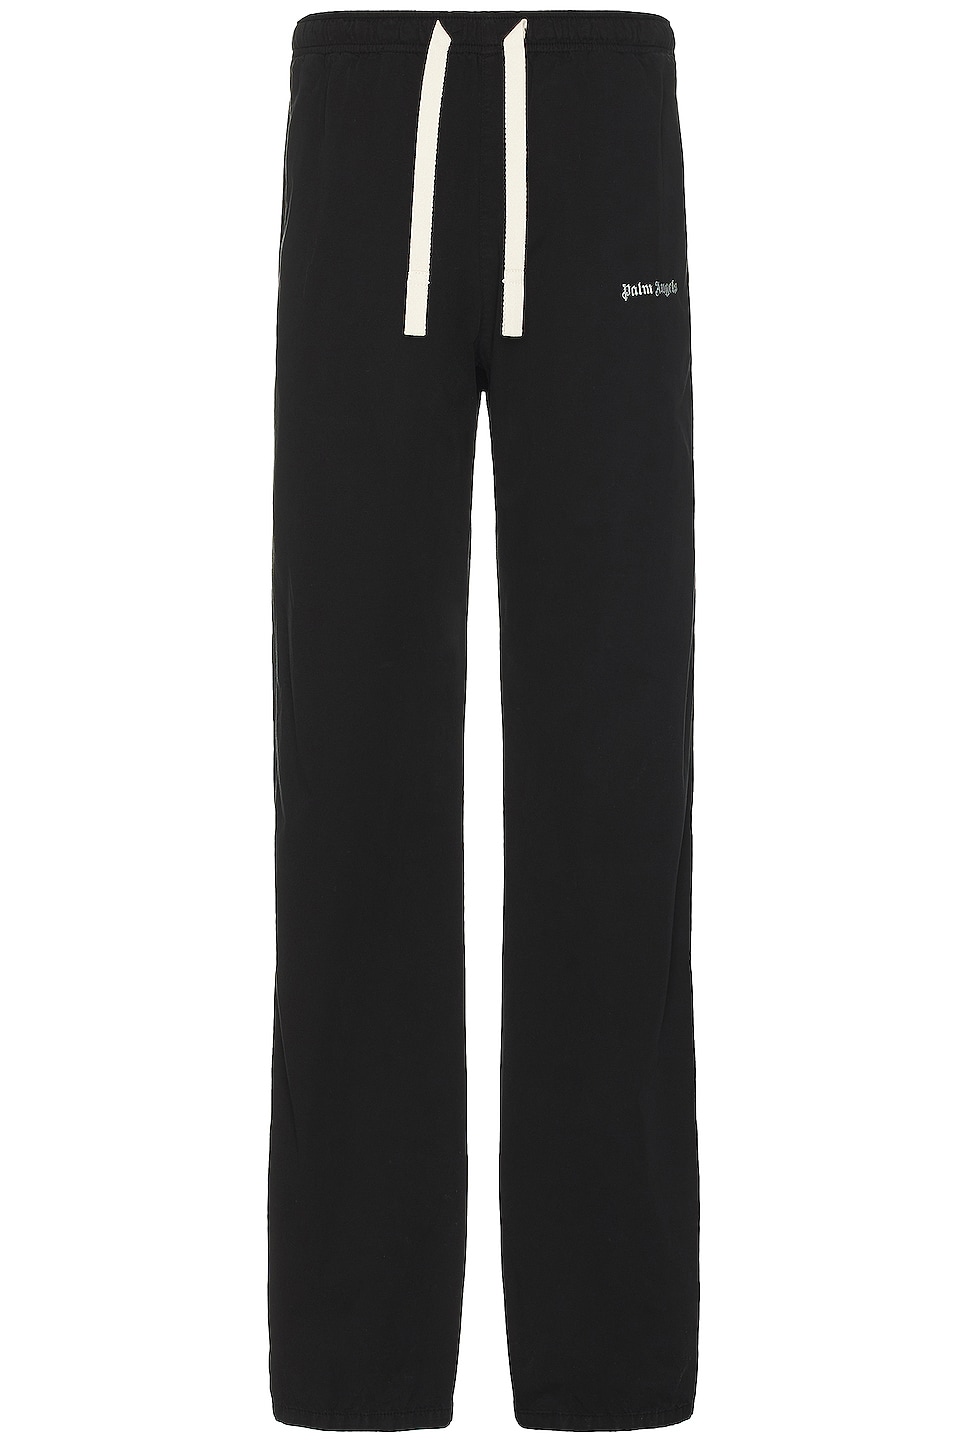 Image 1 of Palm Angels Logo Cotton Travel Pant in Black